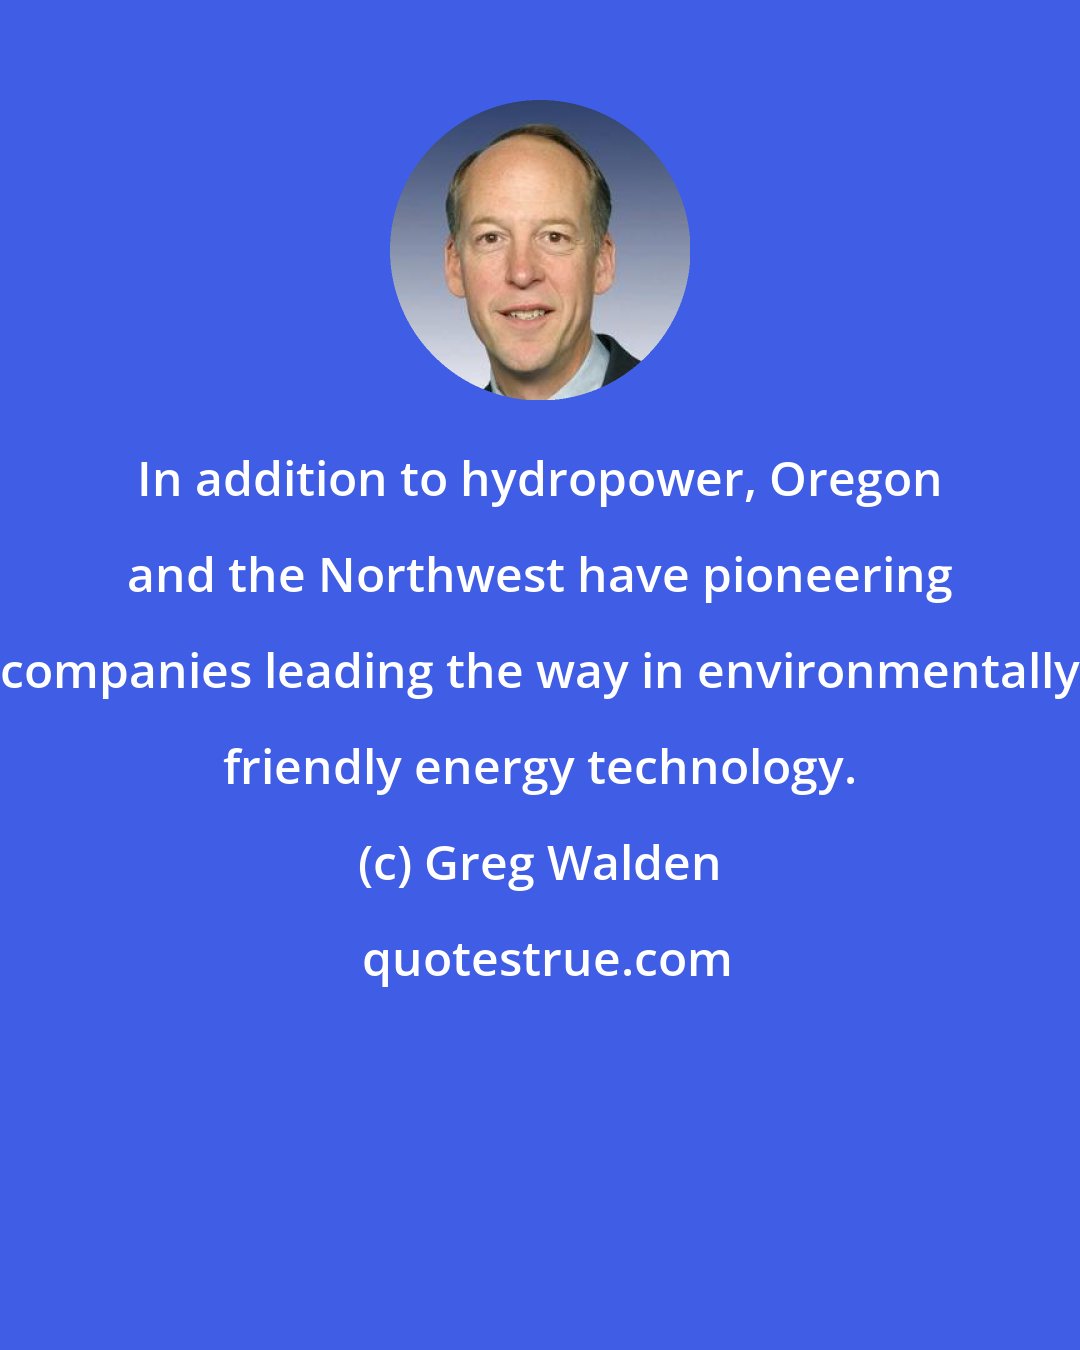 Greg Walden: In addition to hydropower, Oregon and the Northwest have pioneering companies leading the way in environmentally friendly energy technology.